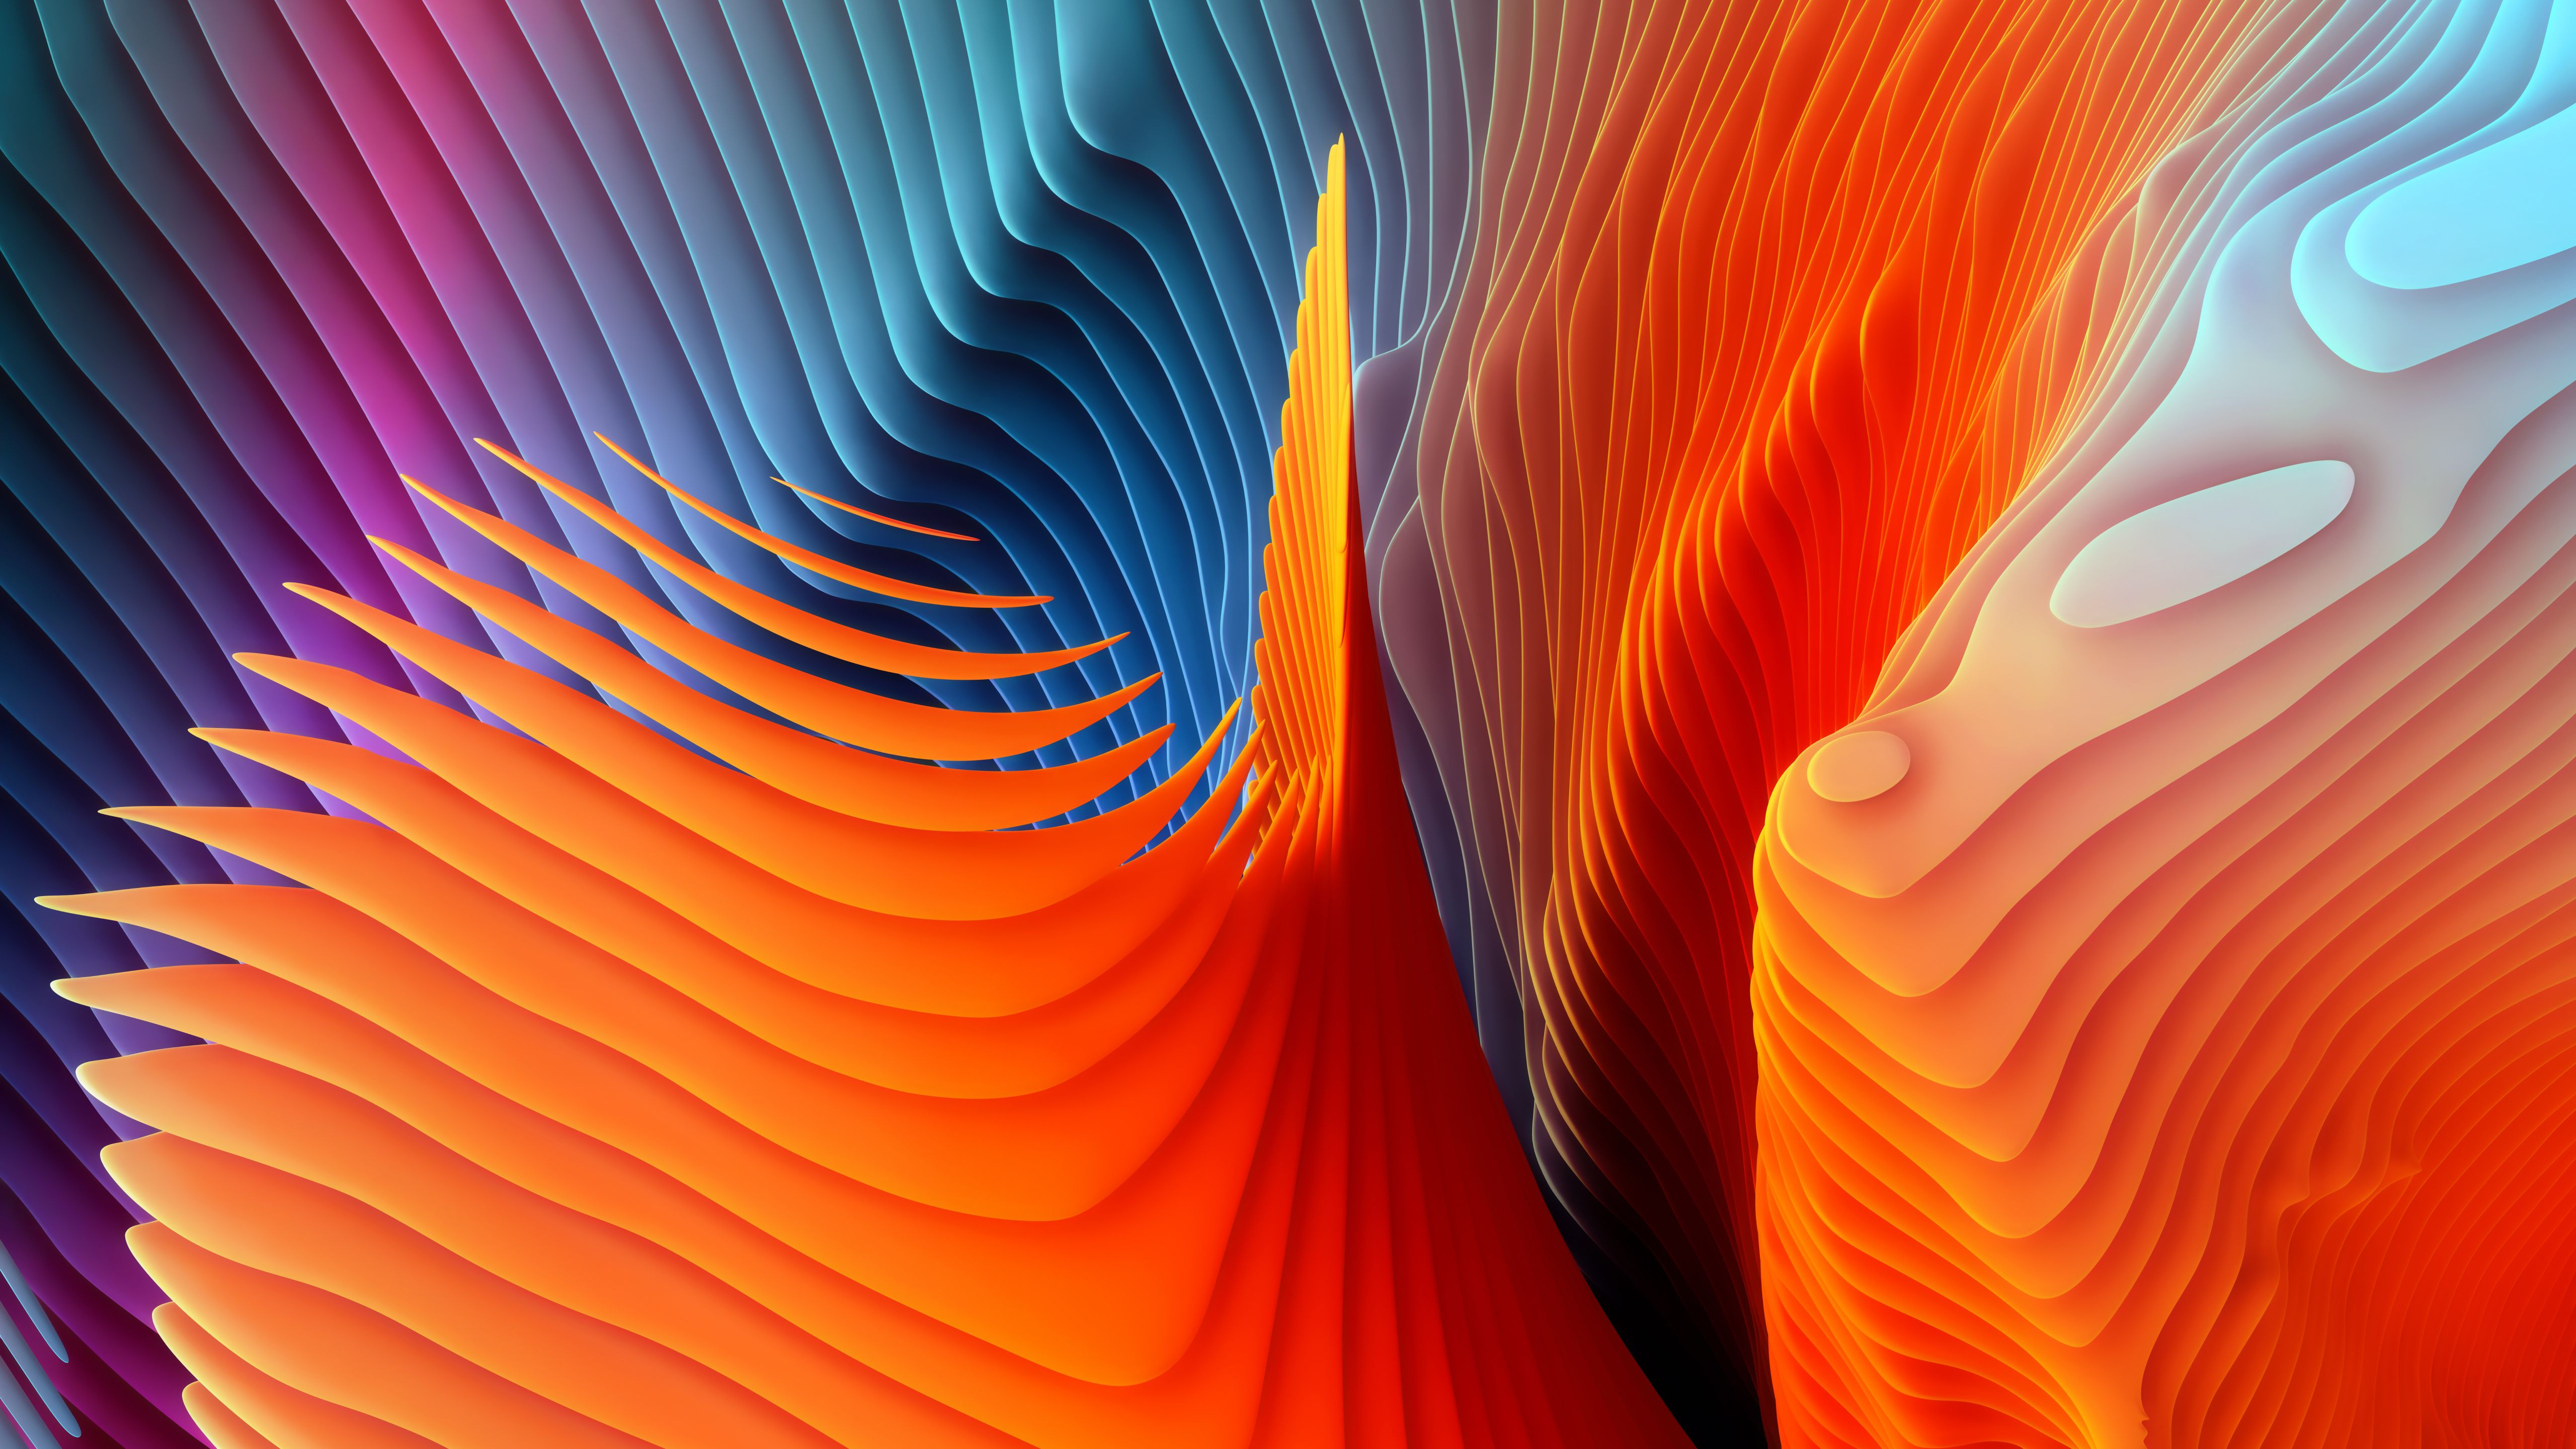 5120x2880 Download New Color Splash Abstract Shapes Wallpaper